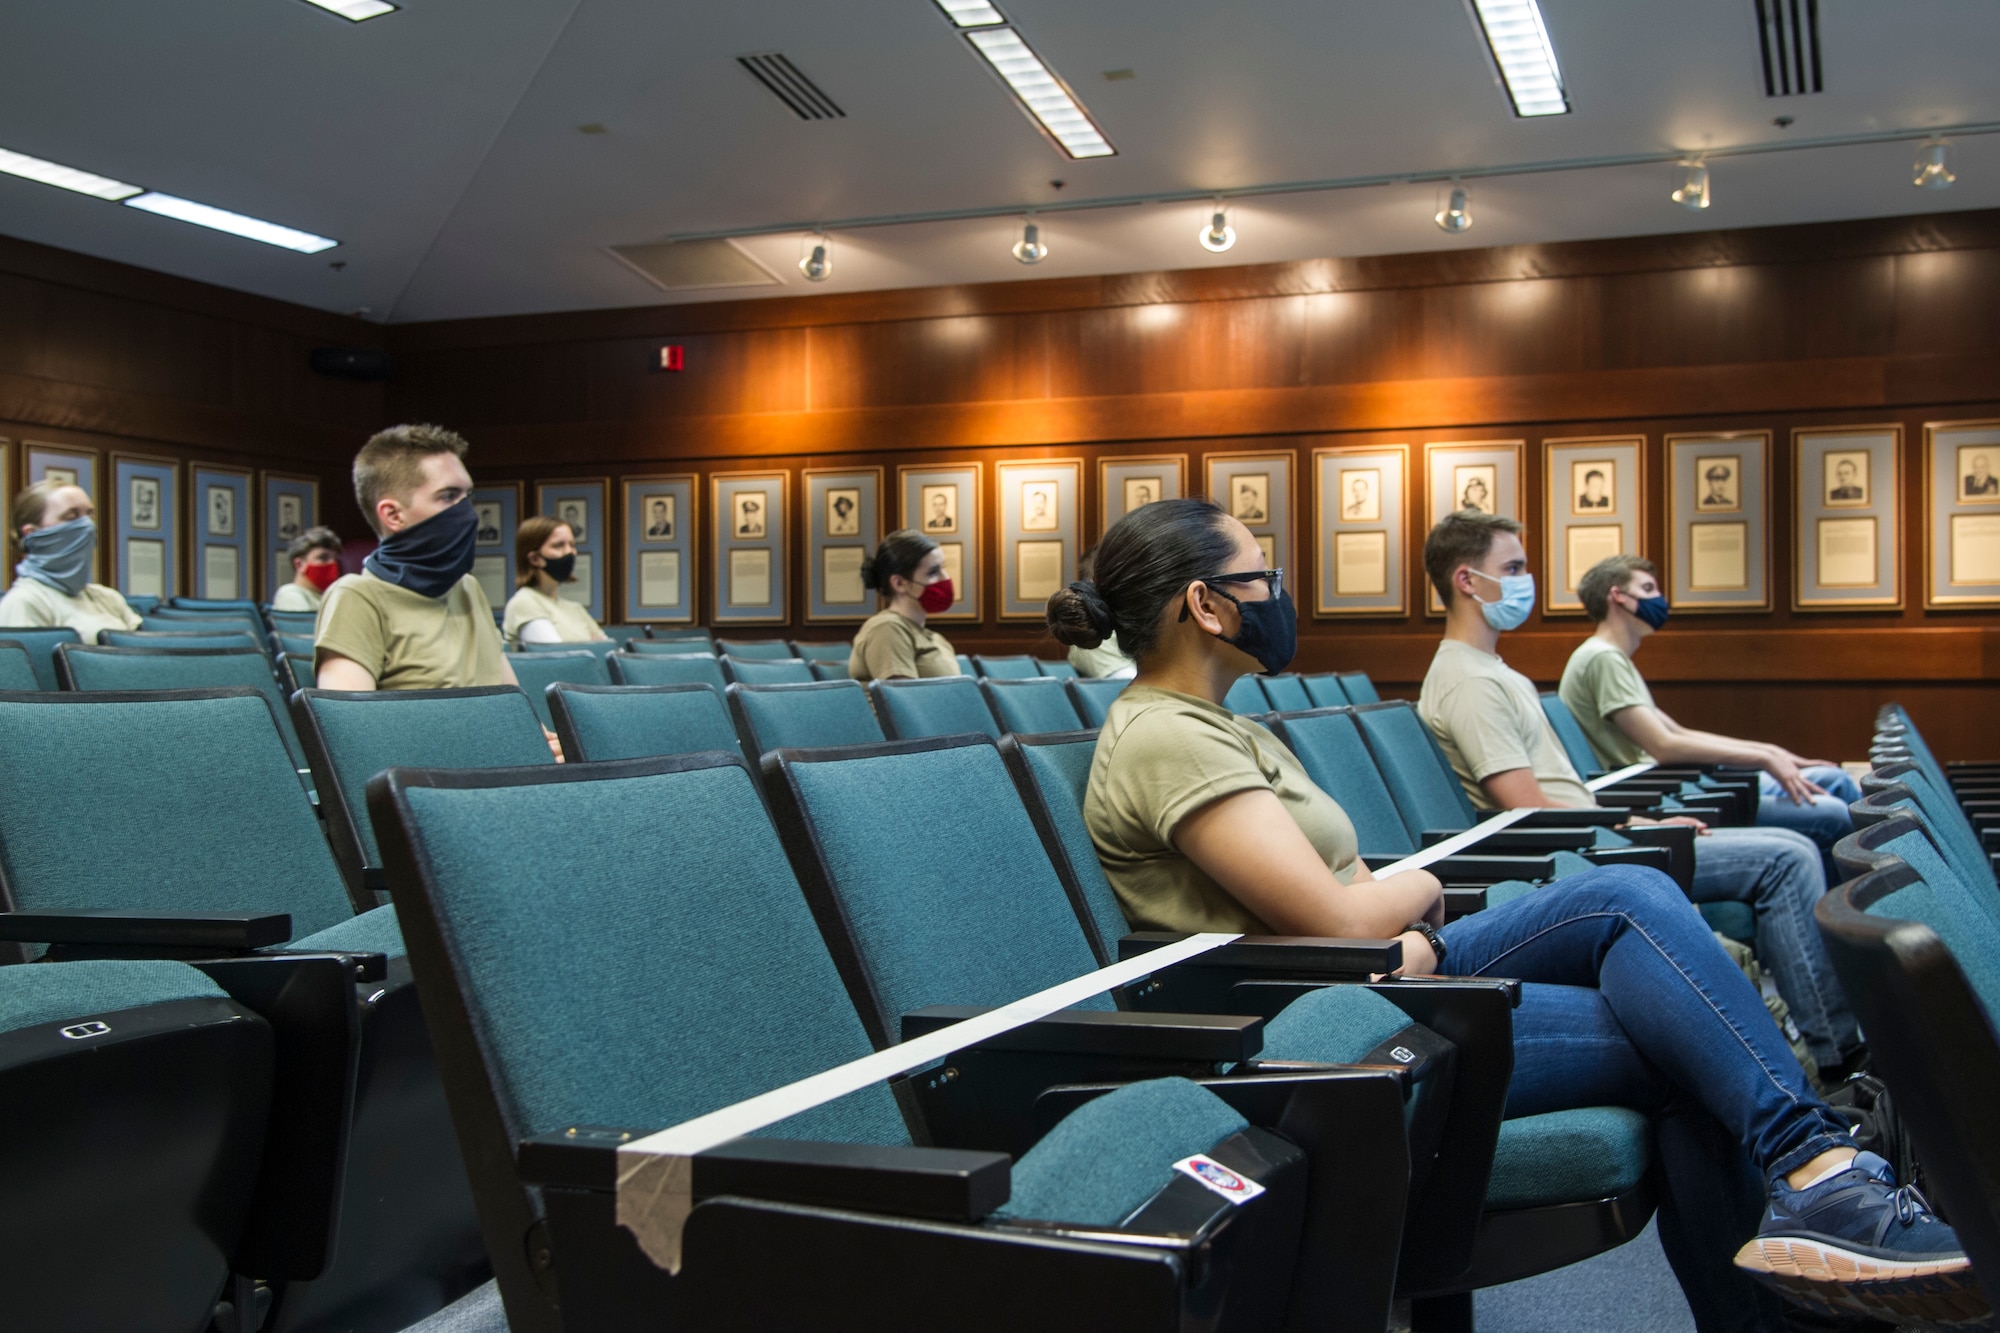 Air Force Reserve trainees sit in a room wearing face coverings